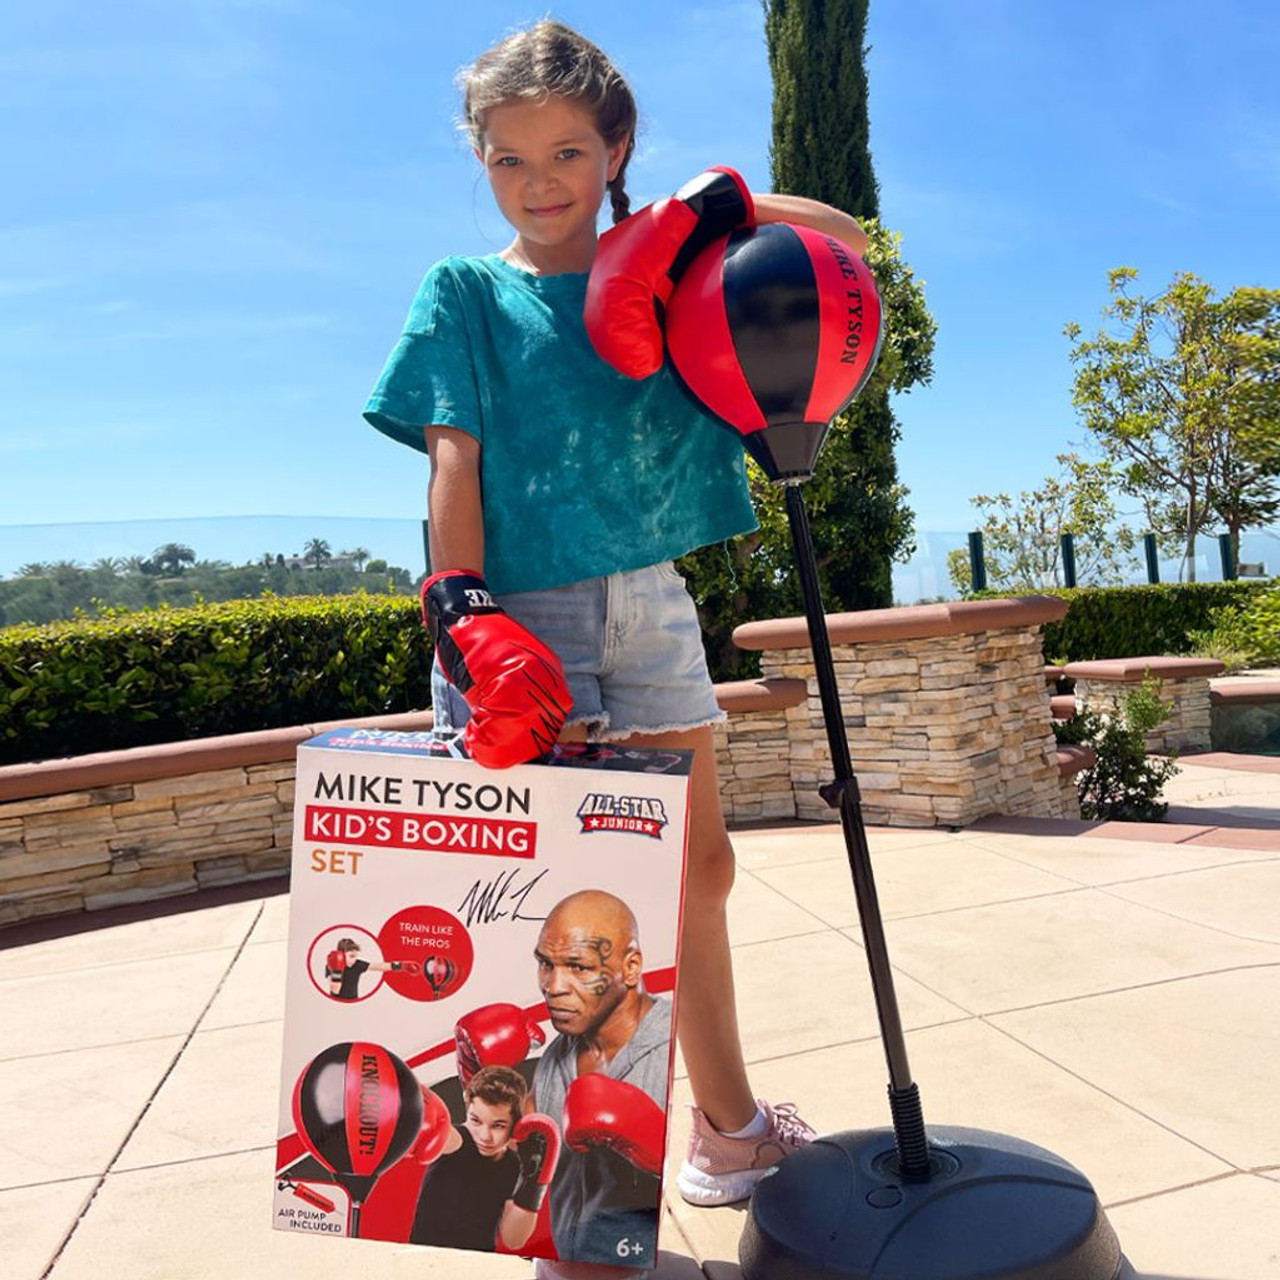 Officially Licensed Mike Tyson Kids' Boxing Set product image